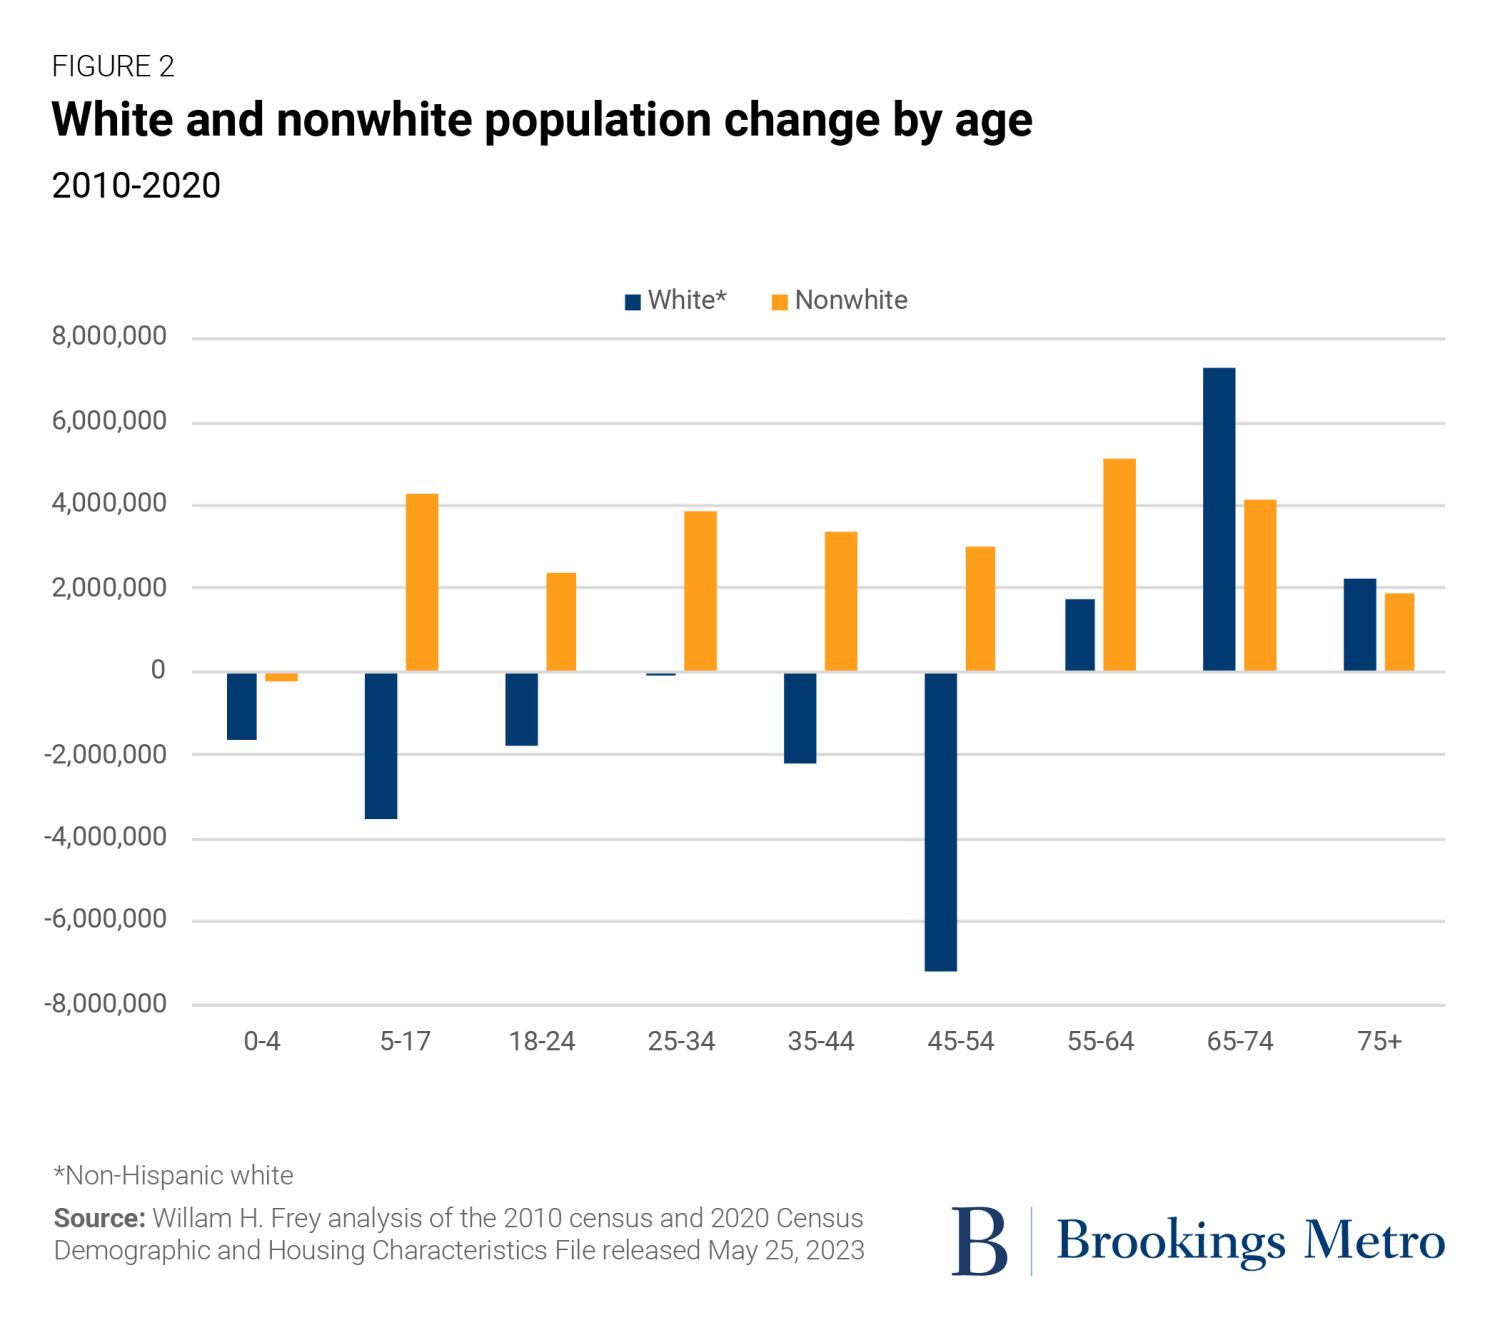 Figure 2: White and nonwhite population change by age